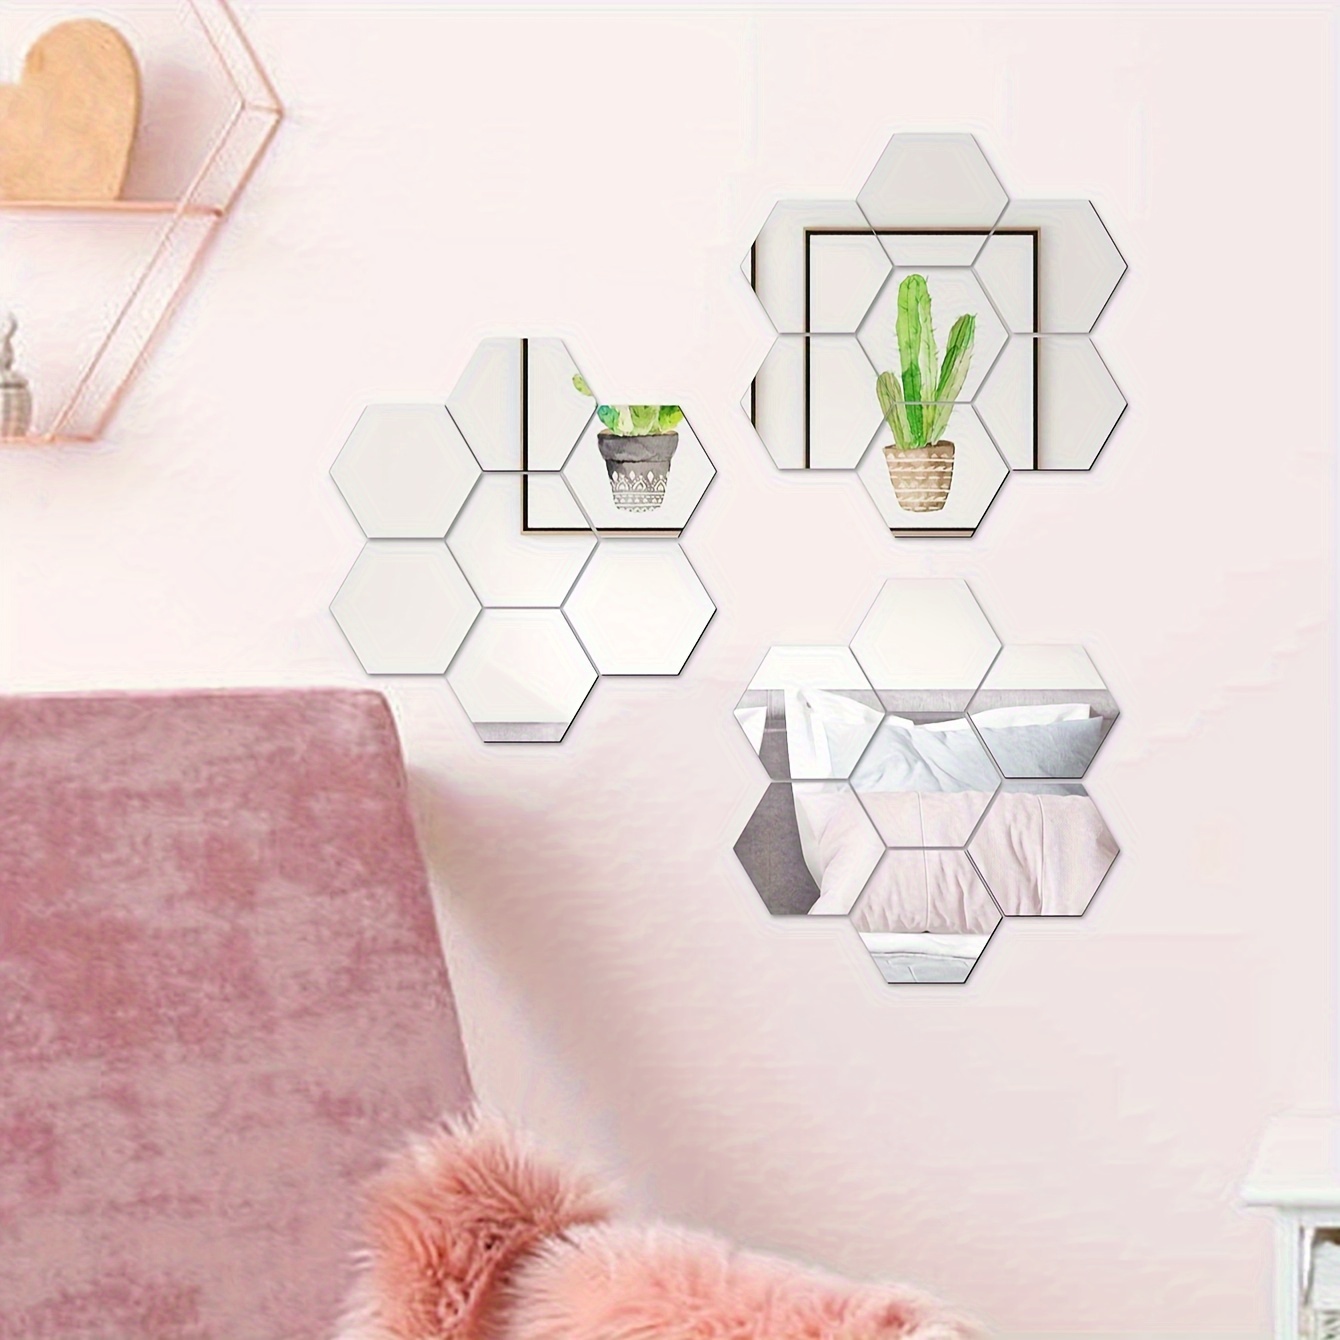 Big Size Removable Hexagon Mirror Wall Stickers, Mirror Art DIY Home  Decorative 3D Acrylic Wall Sheet Plastic Mirror Tiles for Living Room  Bedroom